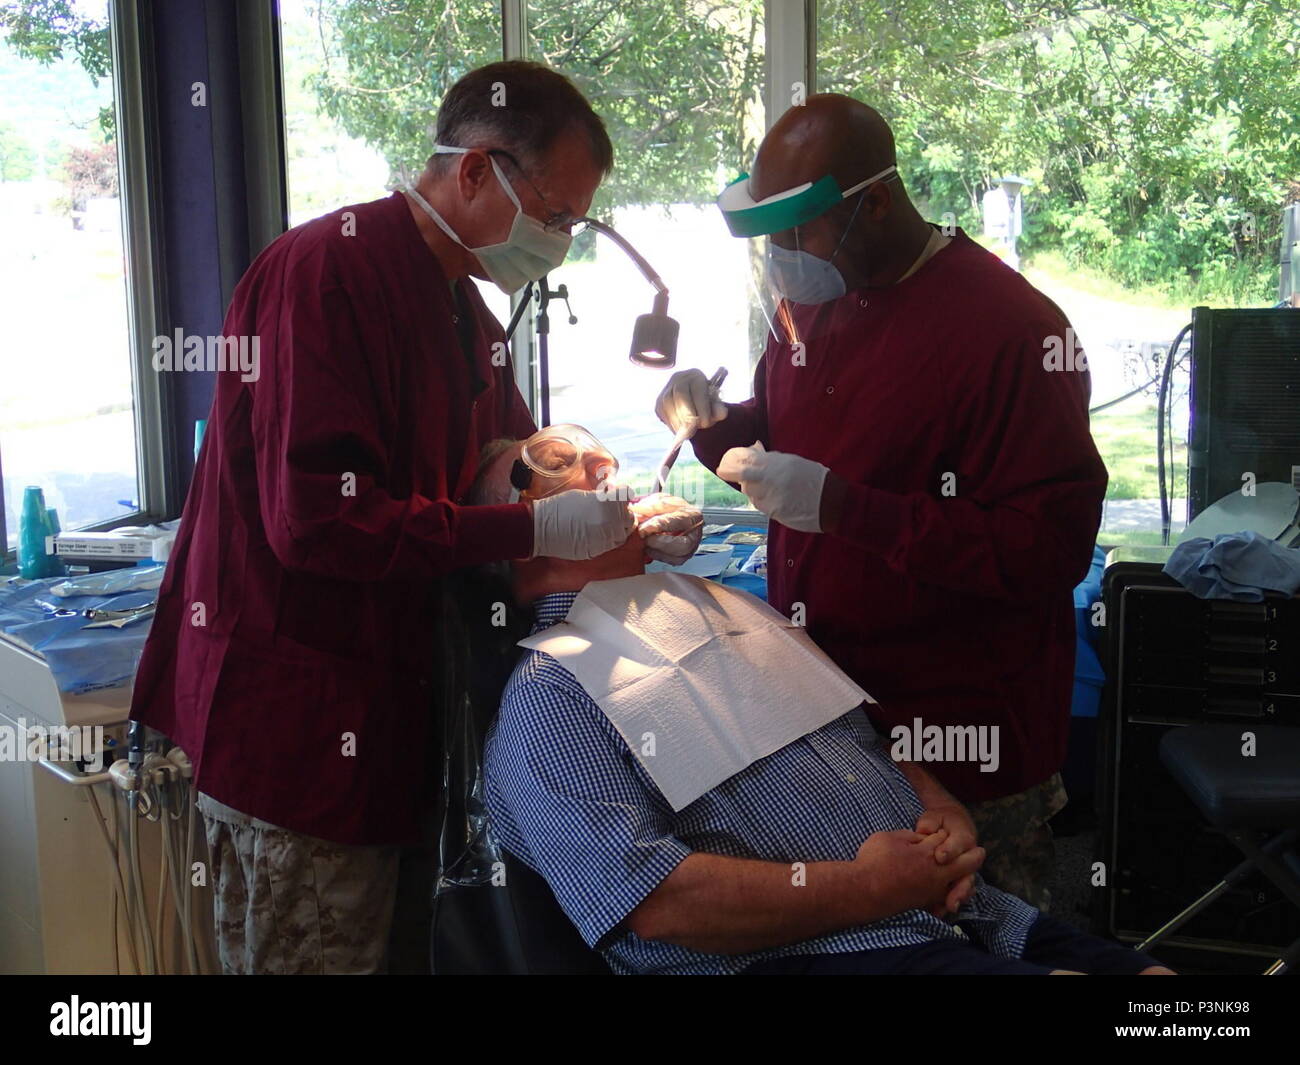 Lt. Blair Willcox, a Navy dentist from the 4th Dental Battalion, Fort Worth, Texas and Sgt. Jerome Capers, a dental technician from Company A, 48th Combat Support Hospital, Fort Story, Va., provide dental care during Greater Chenango Cares on July 15, 2016.  Greater Chenango Cares is one of the Innovative Readiness Training events which provides real-world training in a joint civil-military environment while delivering world class medical care to the people of Chenango County, N.Y., from July 15-24. Stock Photo